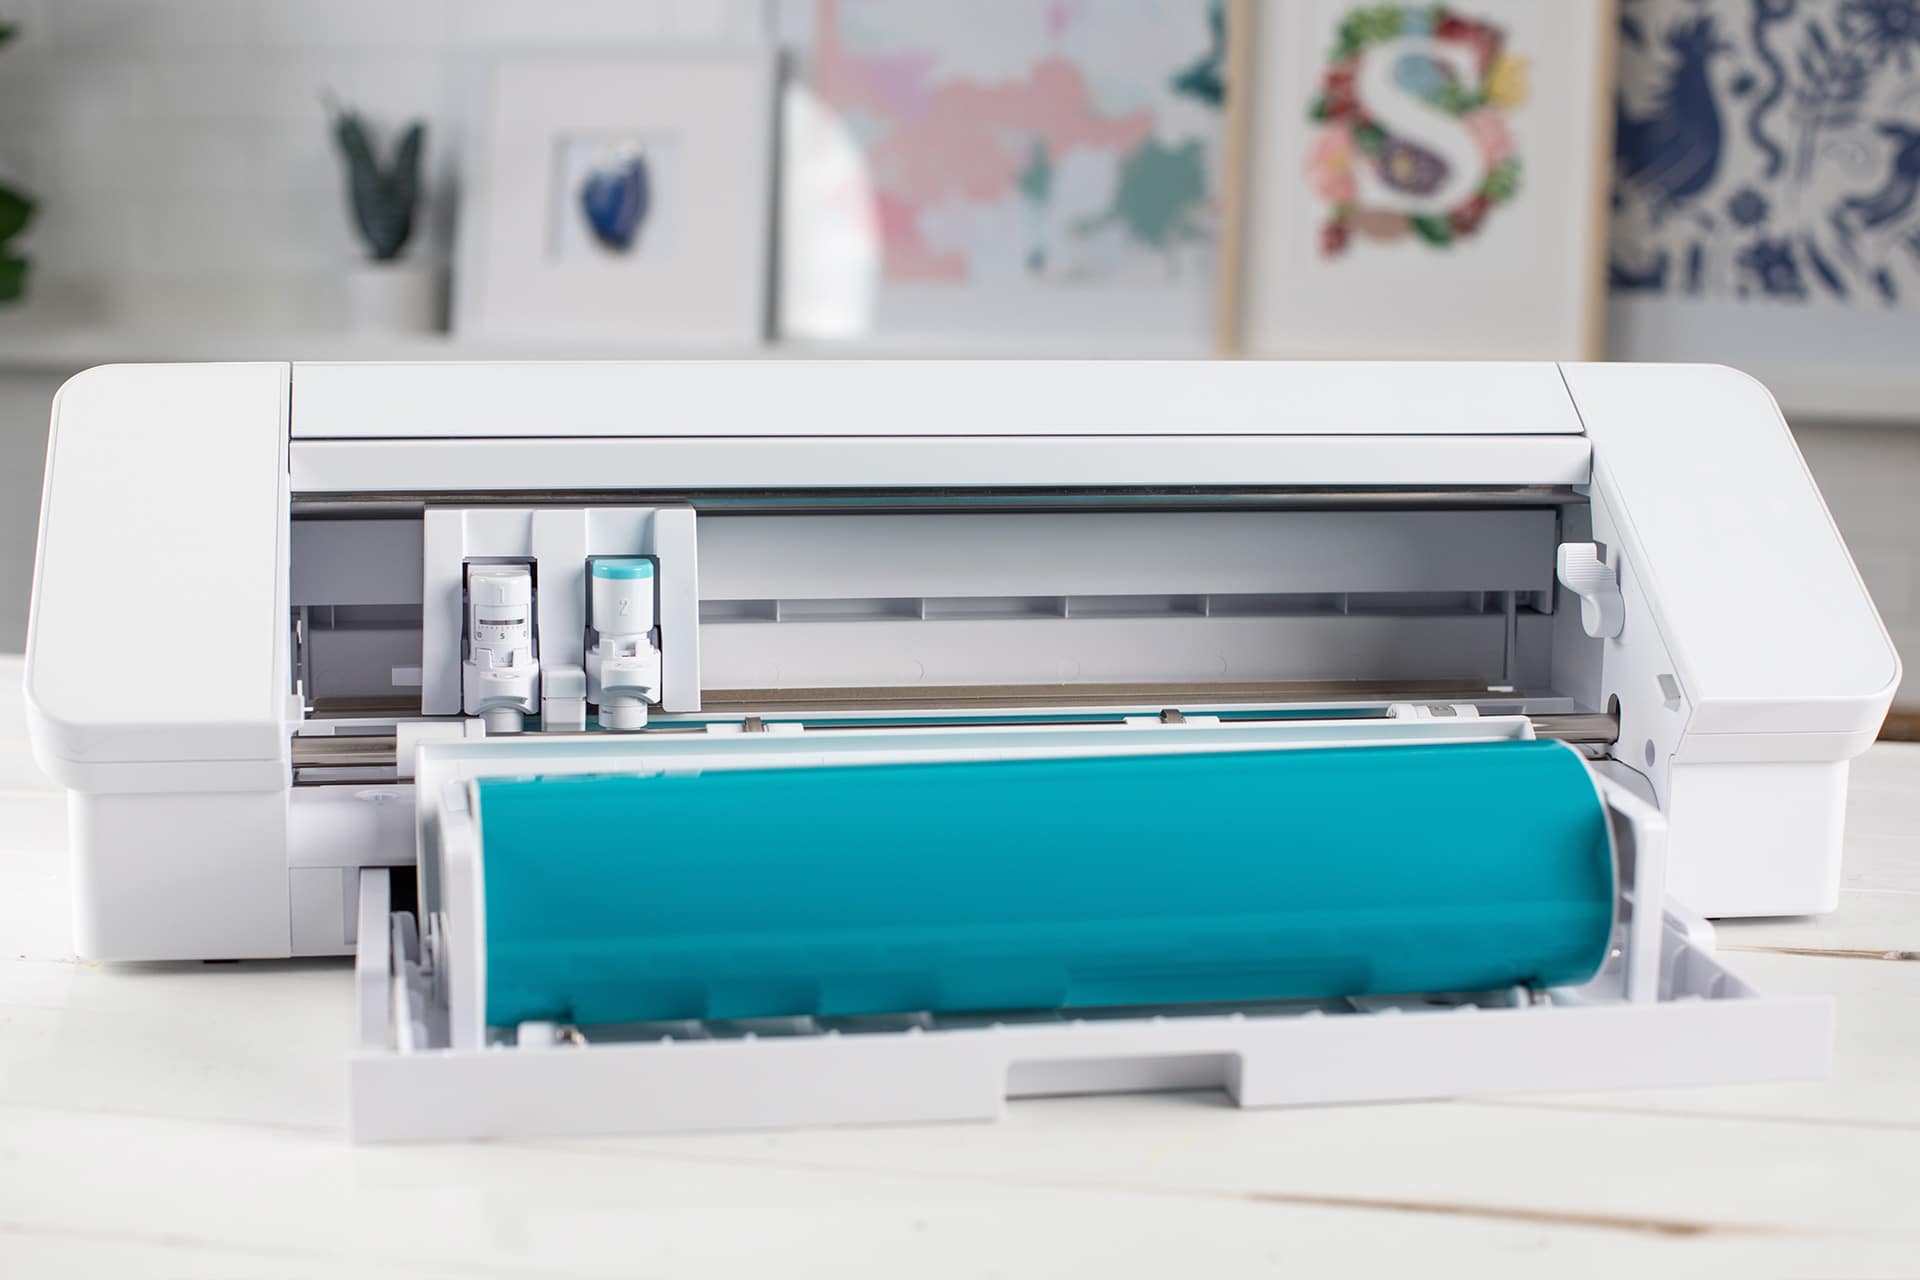 Silhouette Cameo Craft Cutter: An Essential Tool for Maker